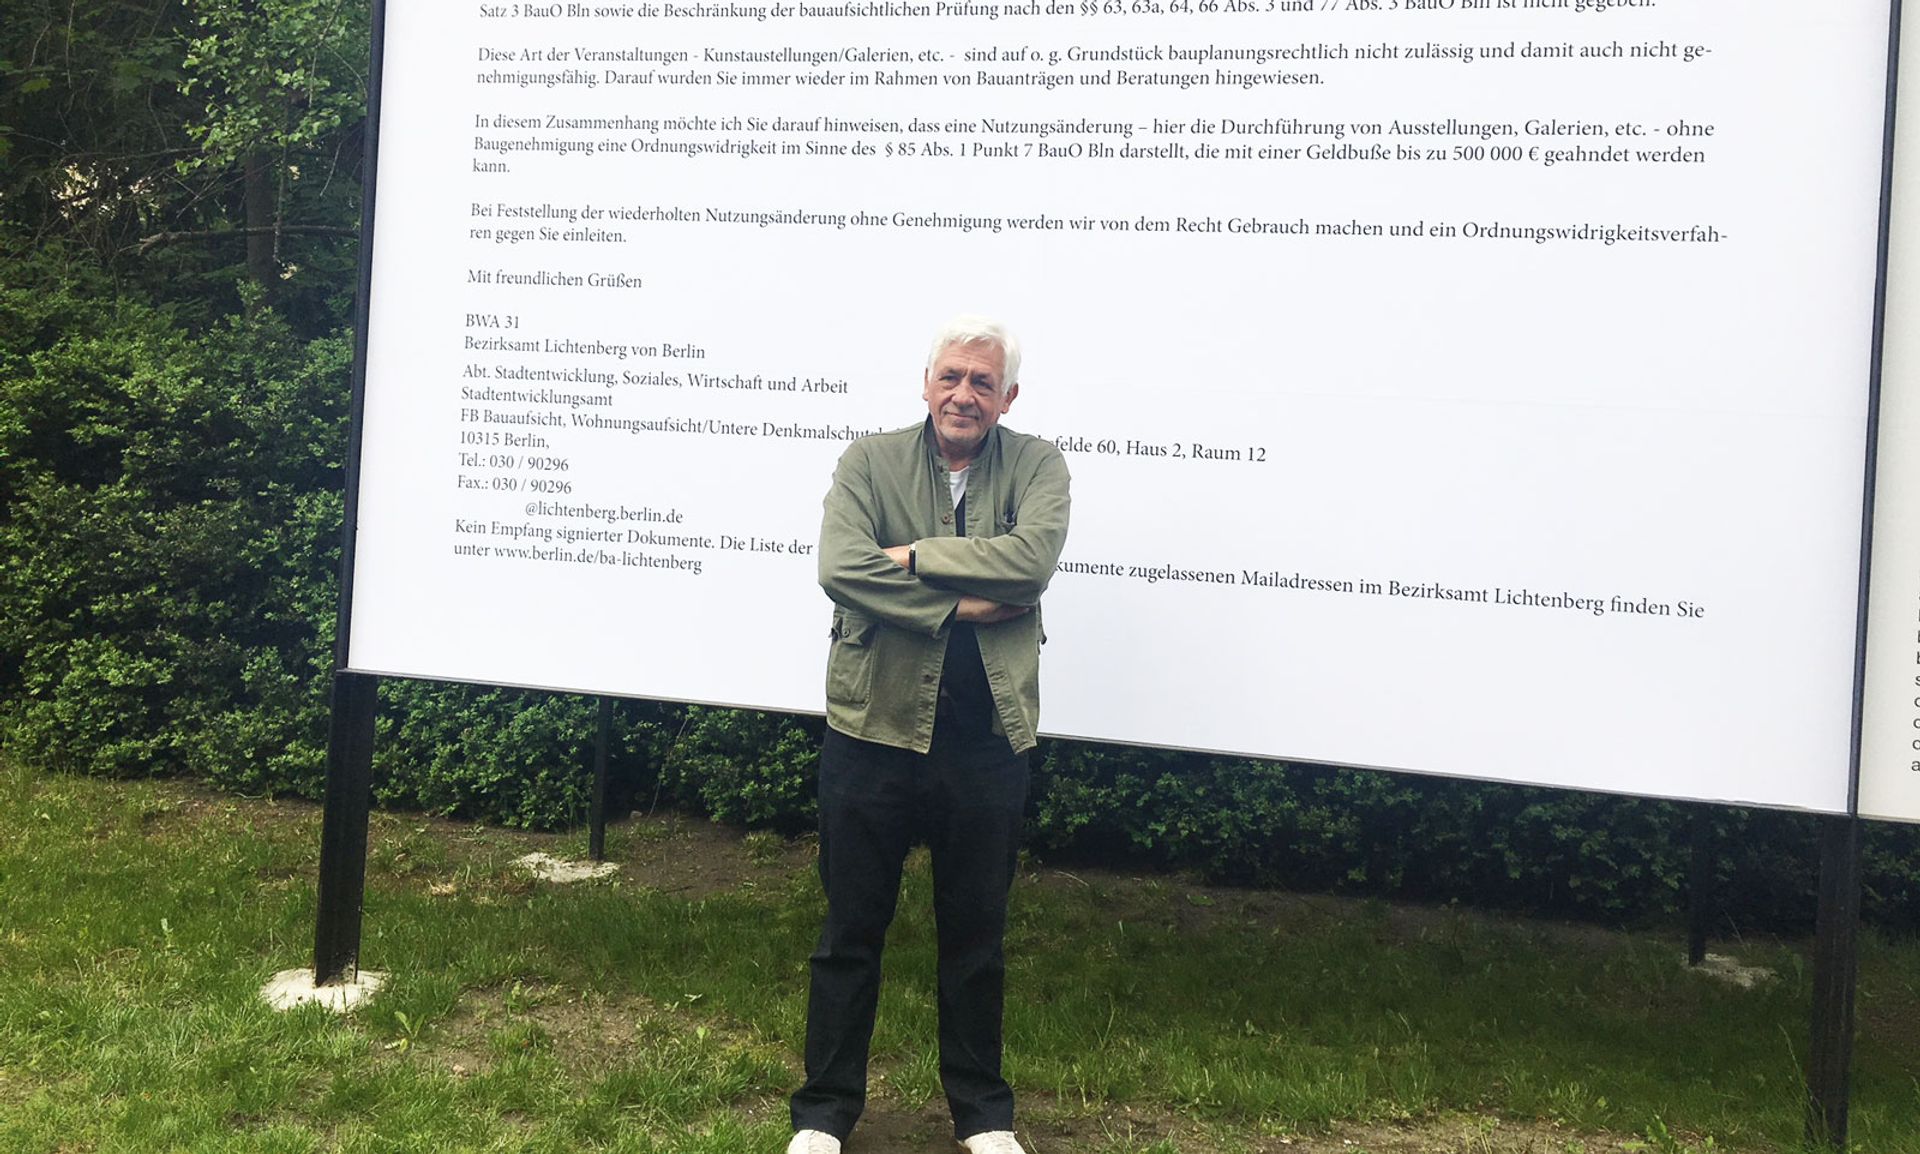 The collector Axel Haubrok in front of a giant copy of the email he received from the local authority saying his exhibition space is violating zoning laws Catherine Hickley